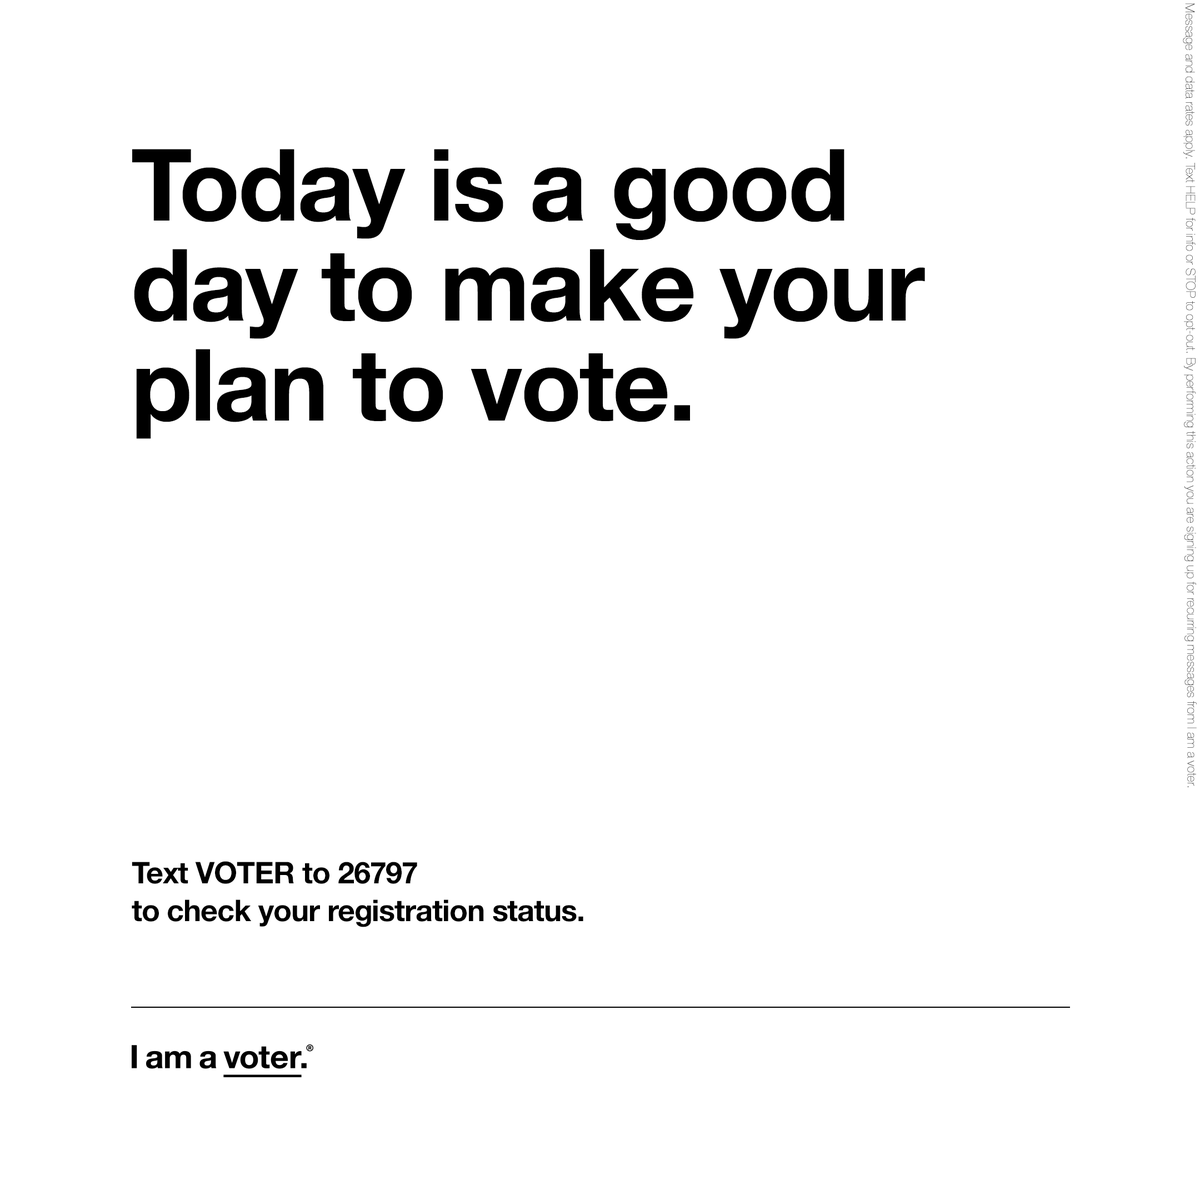 Today is a good day to make your plan to vote. Start by checking your voter registration status by texting HMVOTES to 26797.